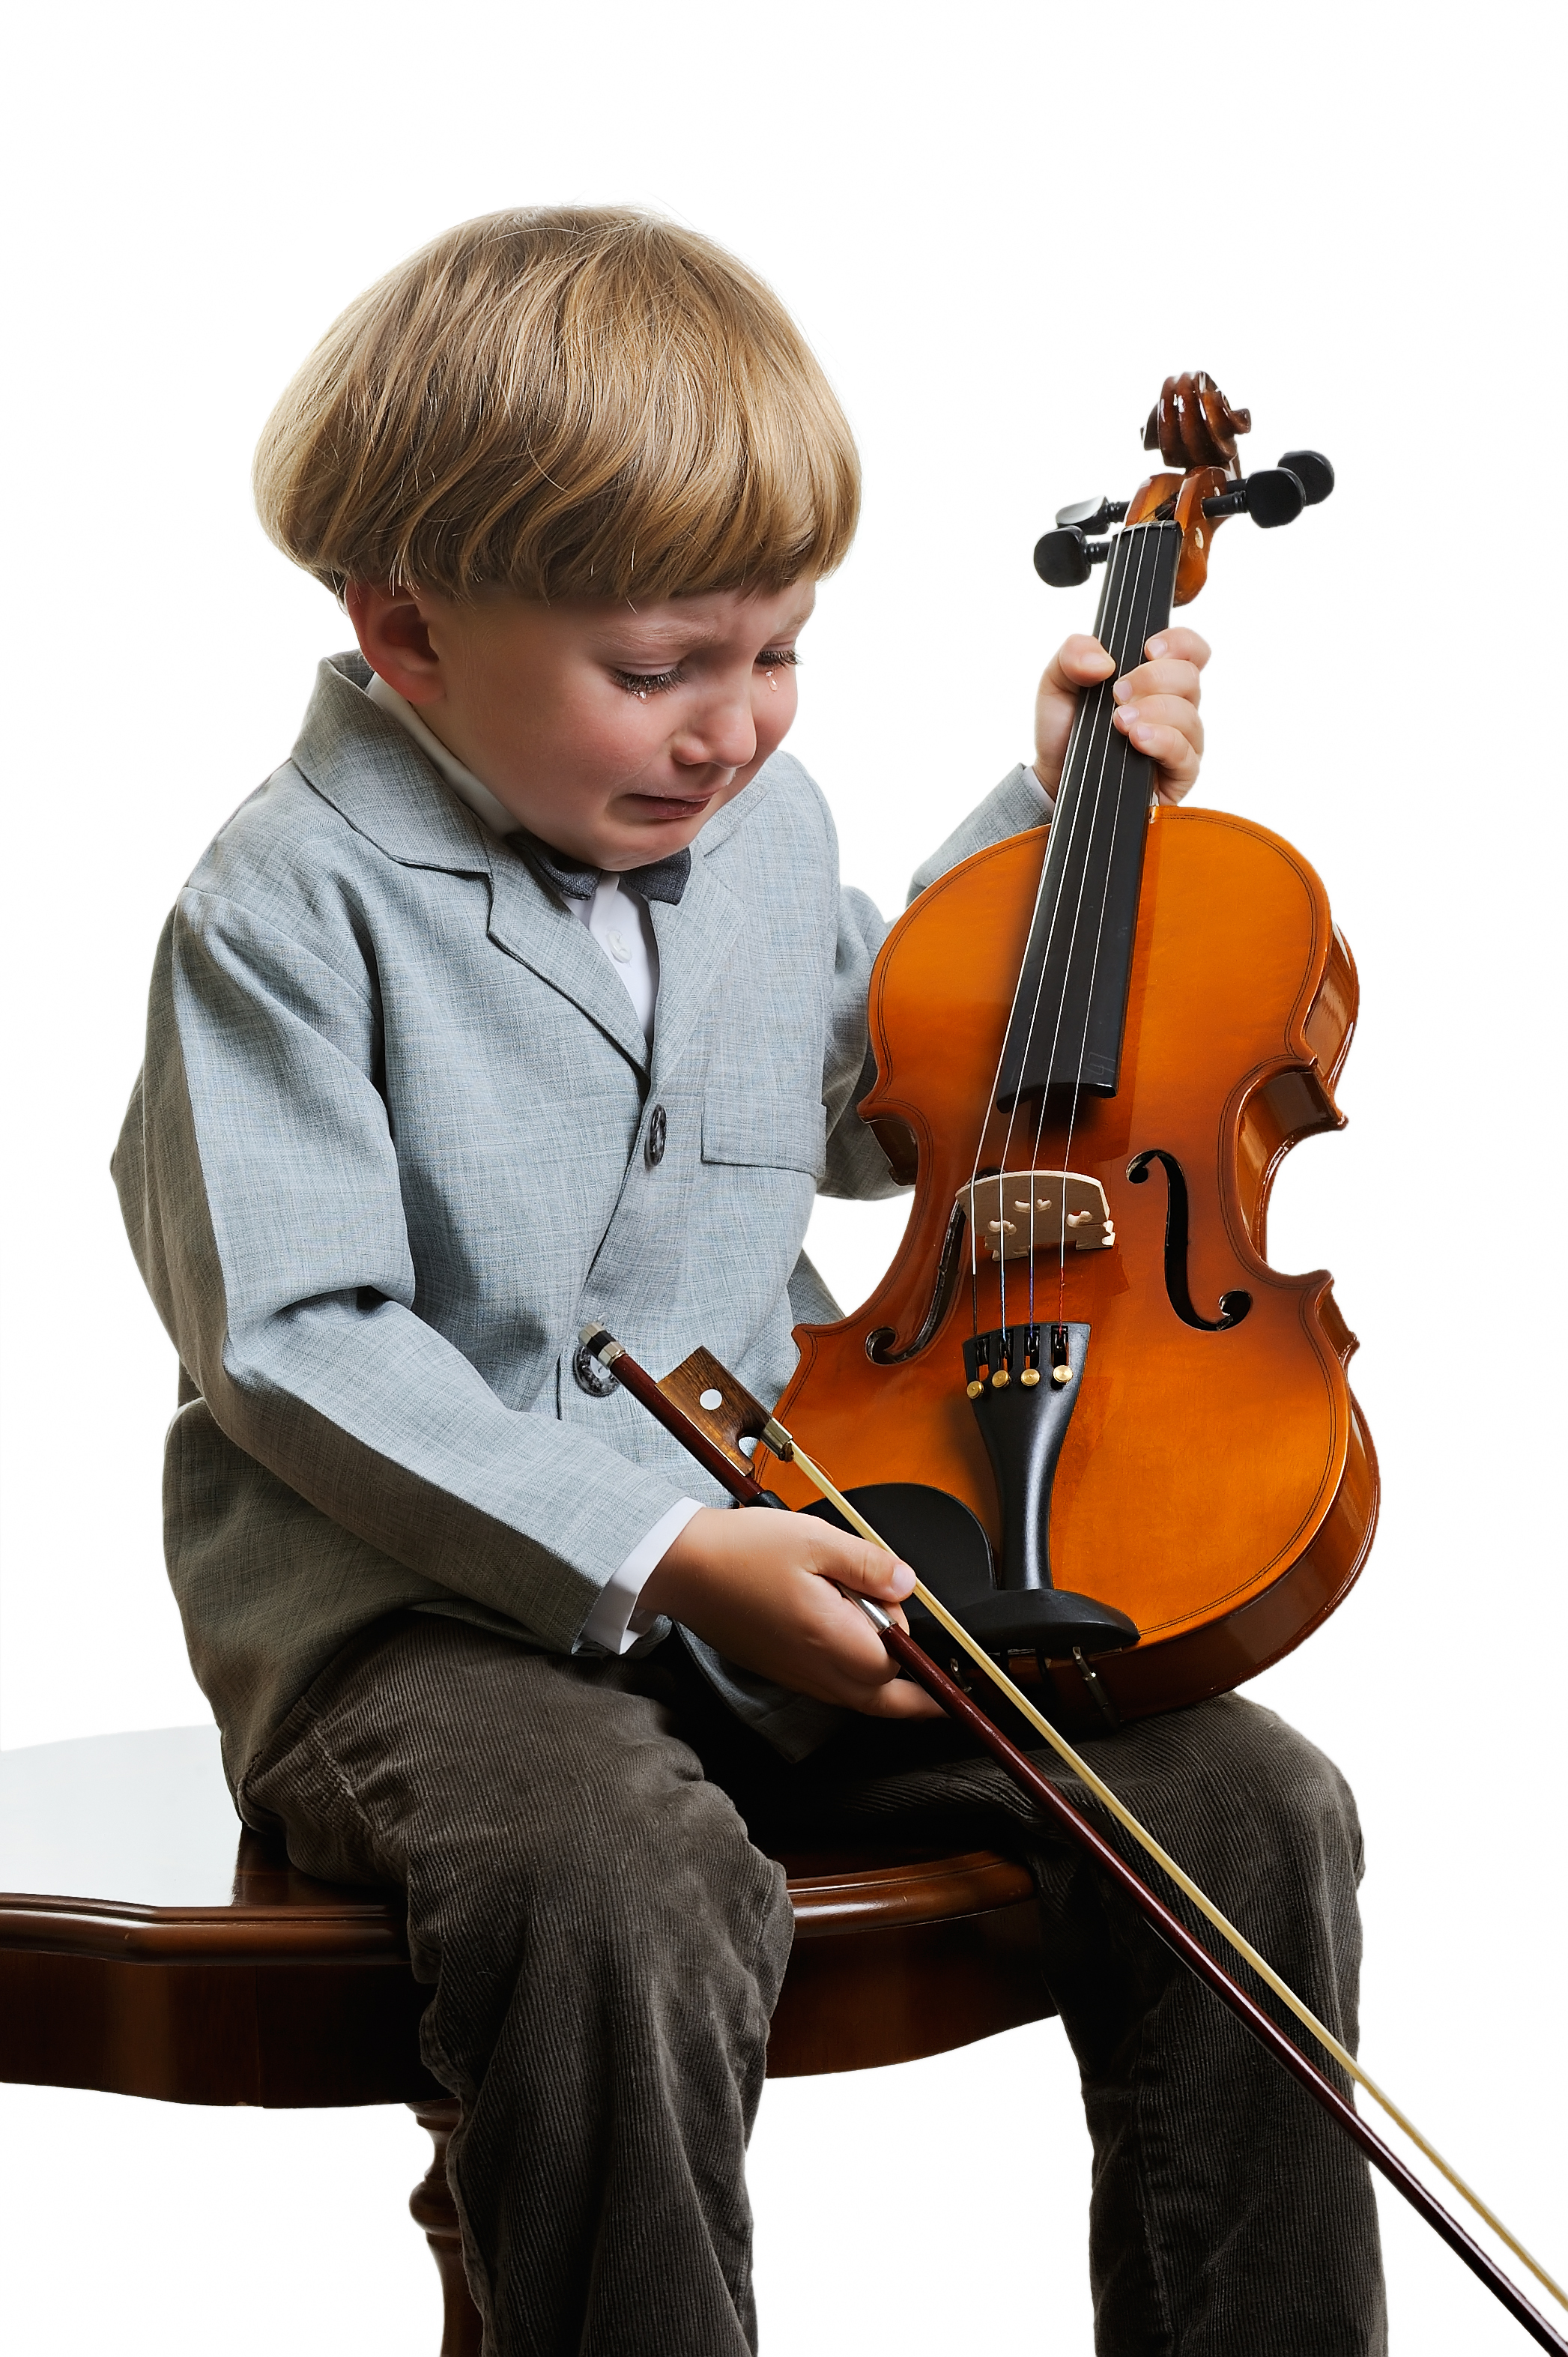 Boy with Violin crying